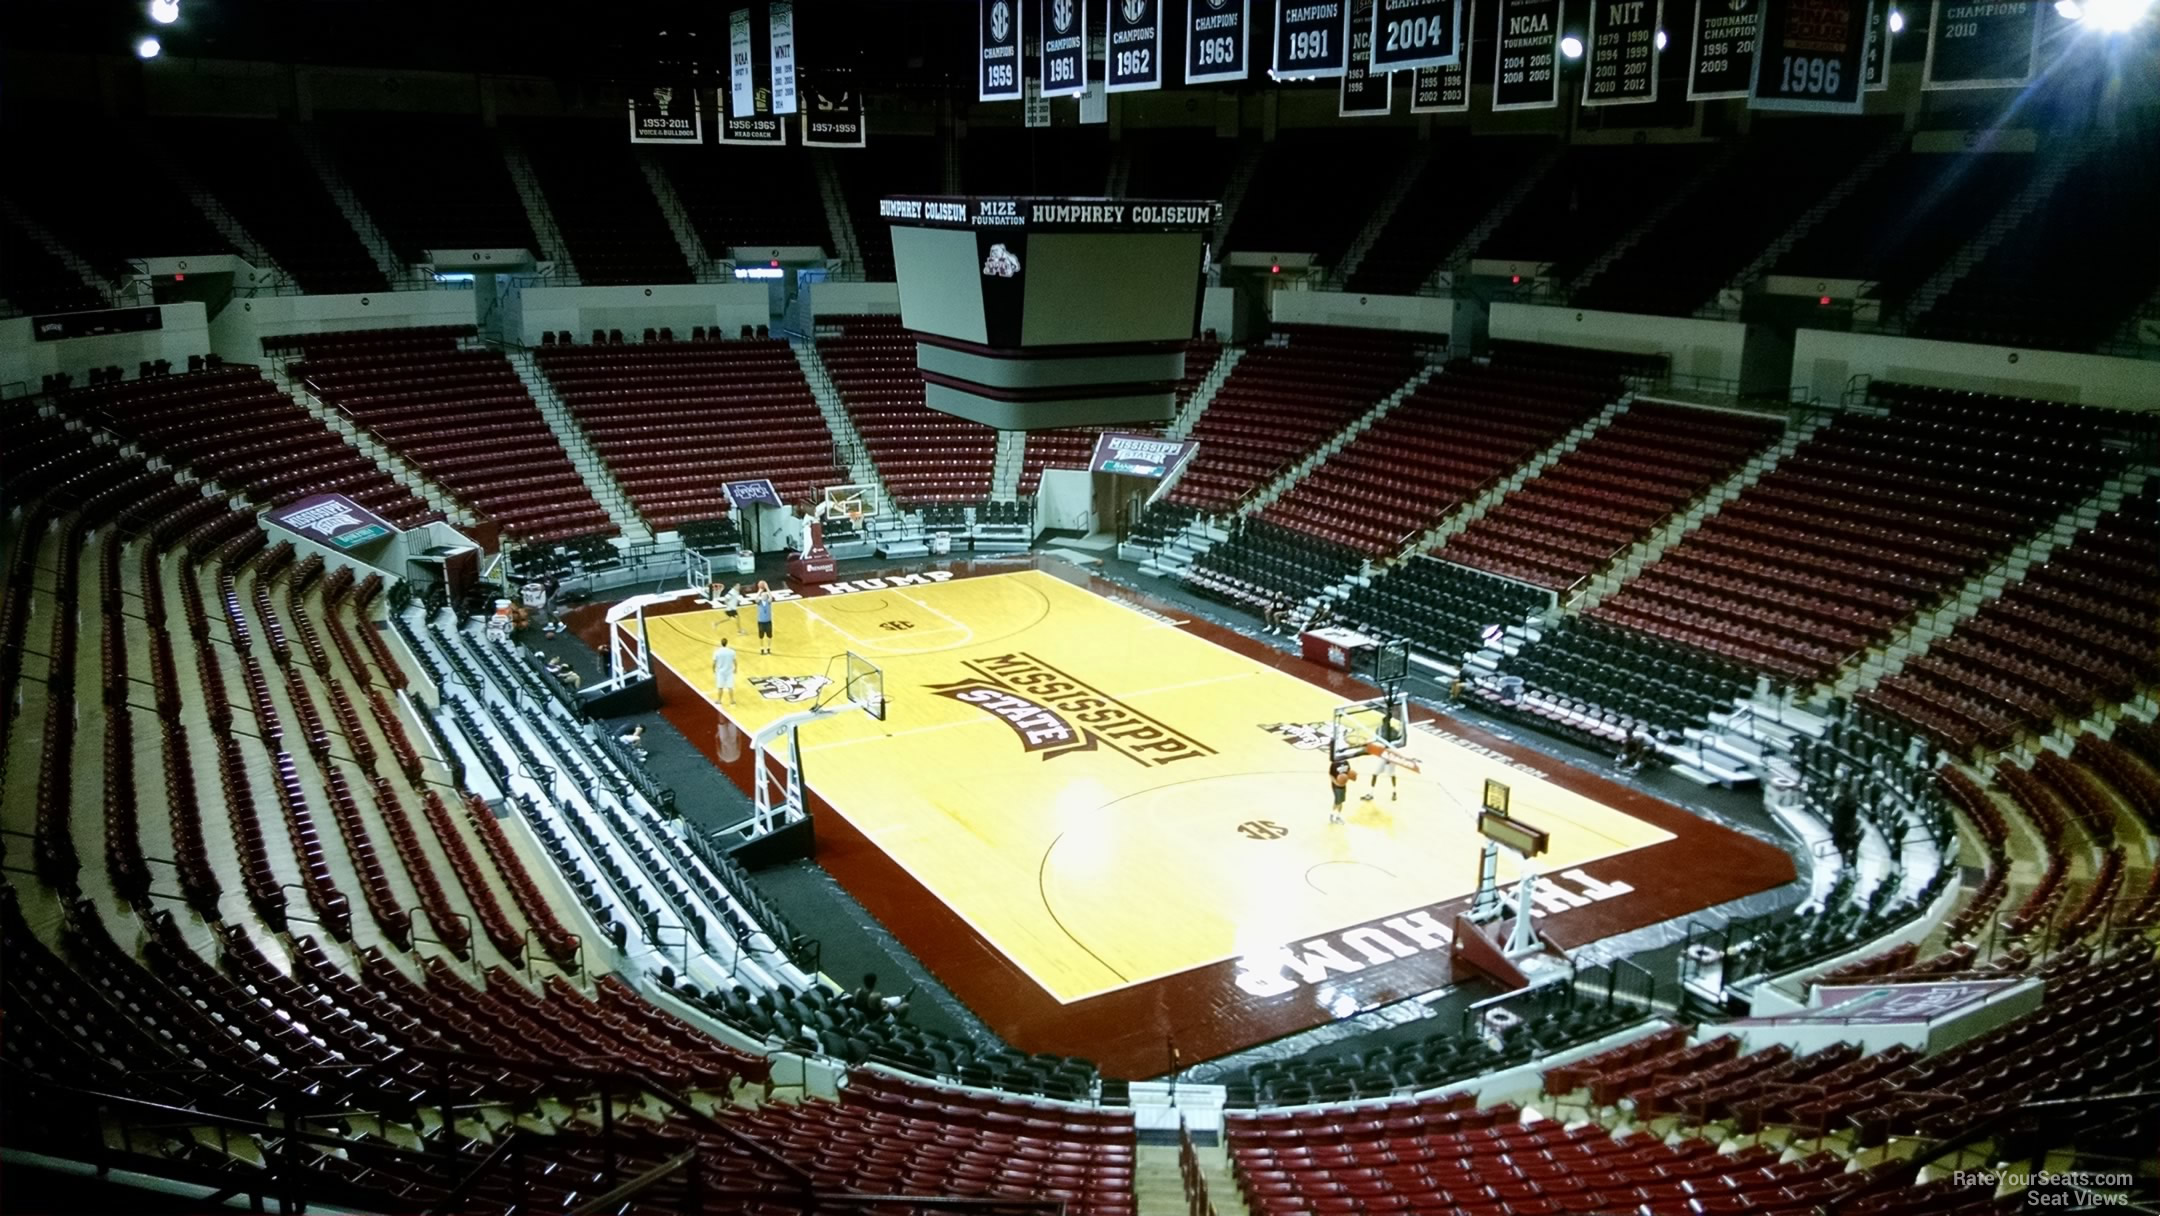 section 204, row 8 seat view  - humphrey coliseum